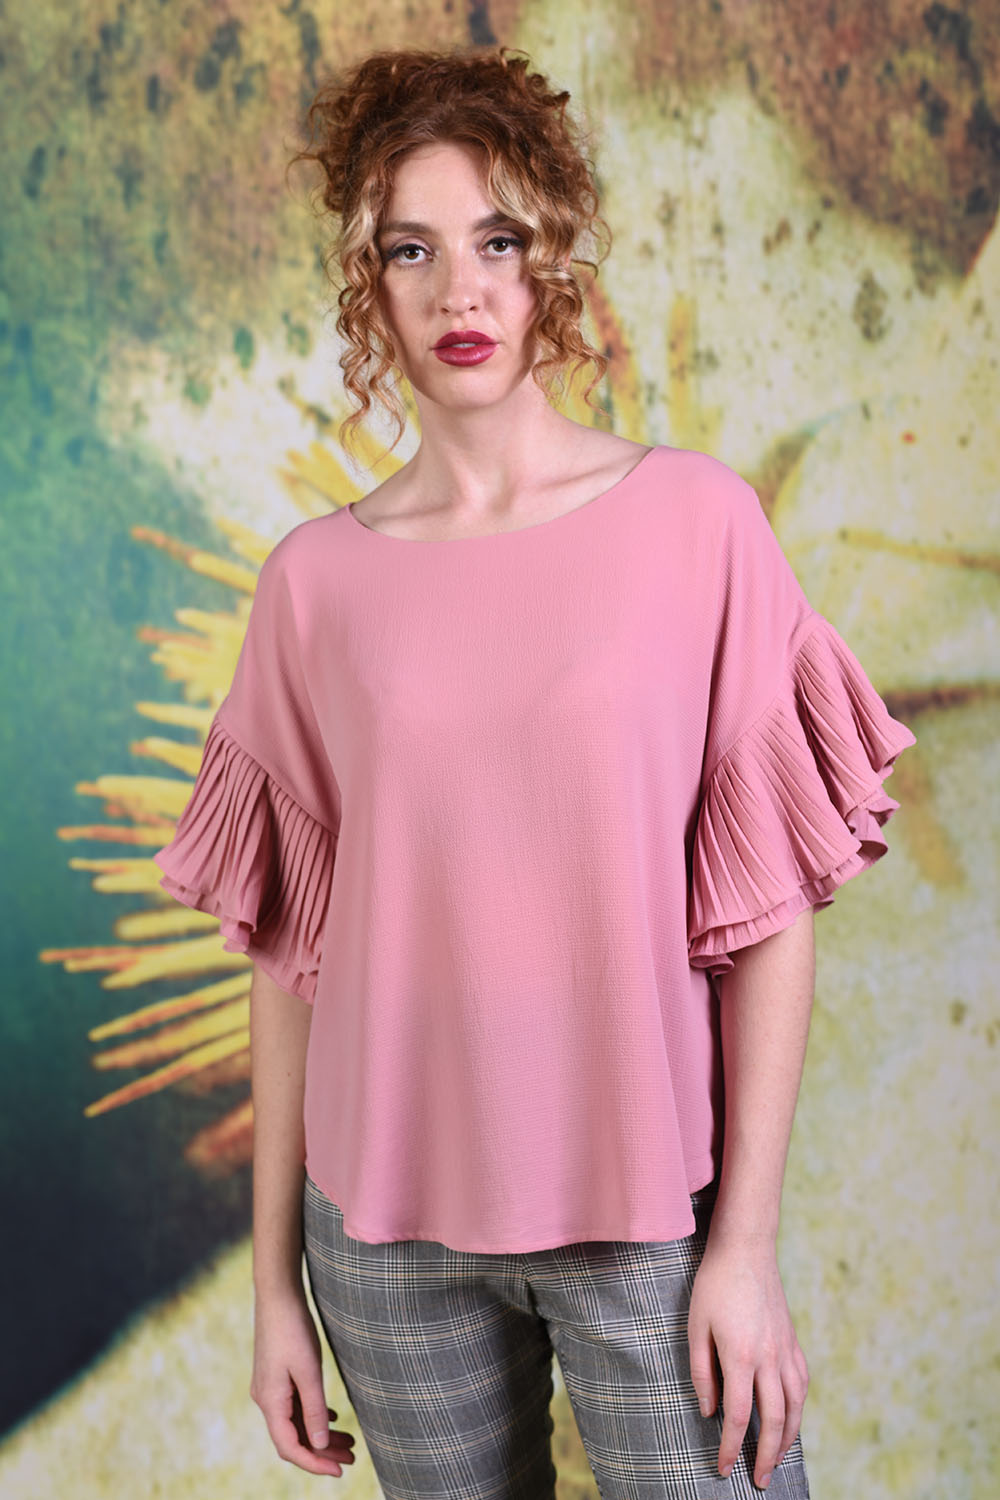 Model wearing the Annah Stretton Dayna top in pink